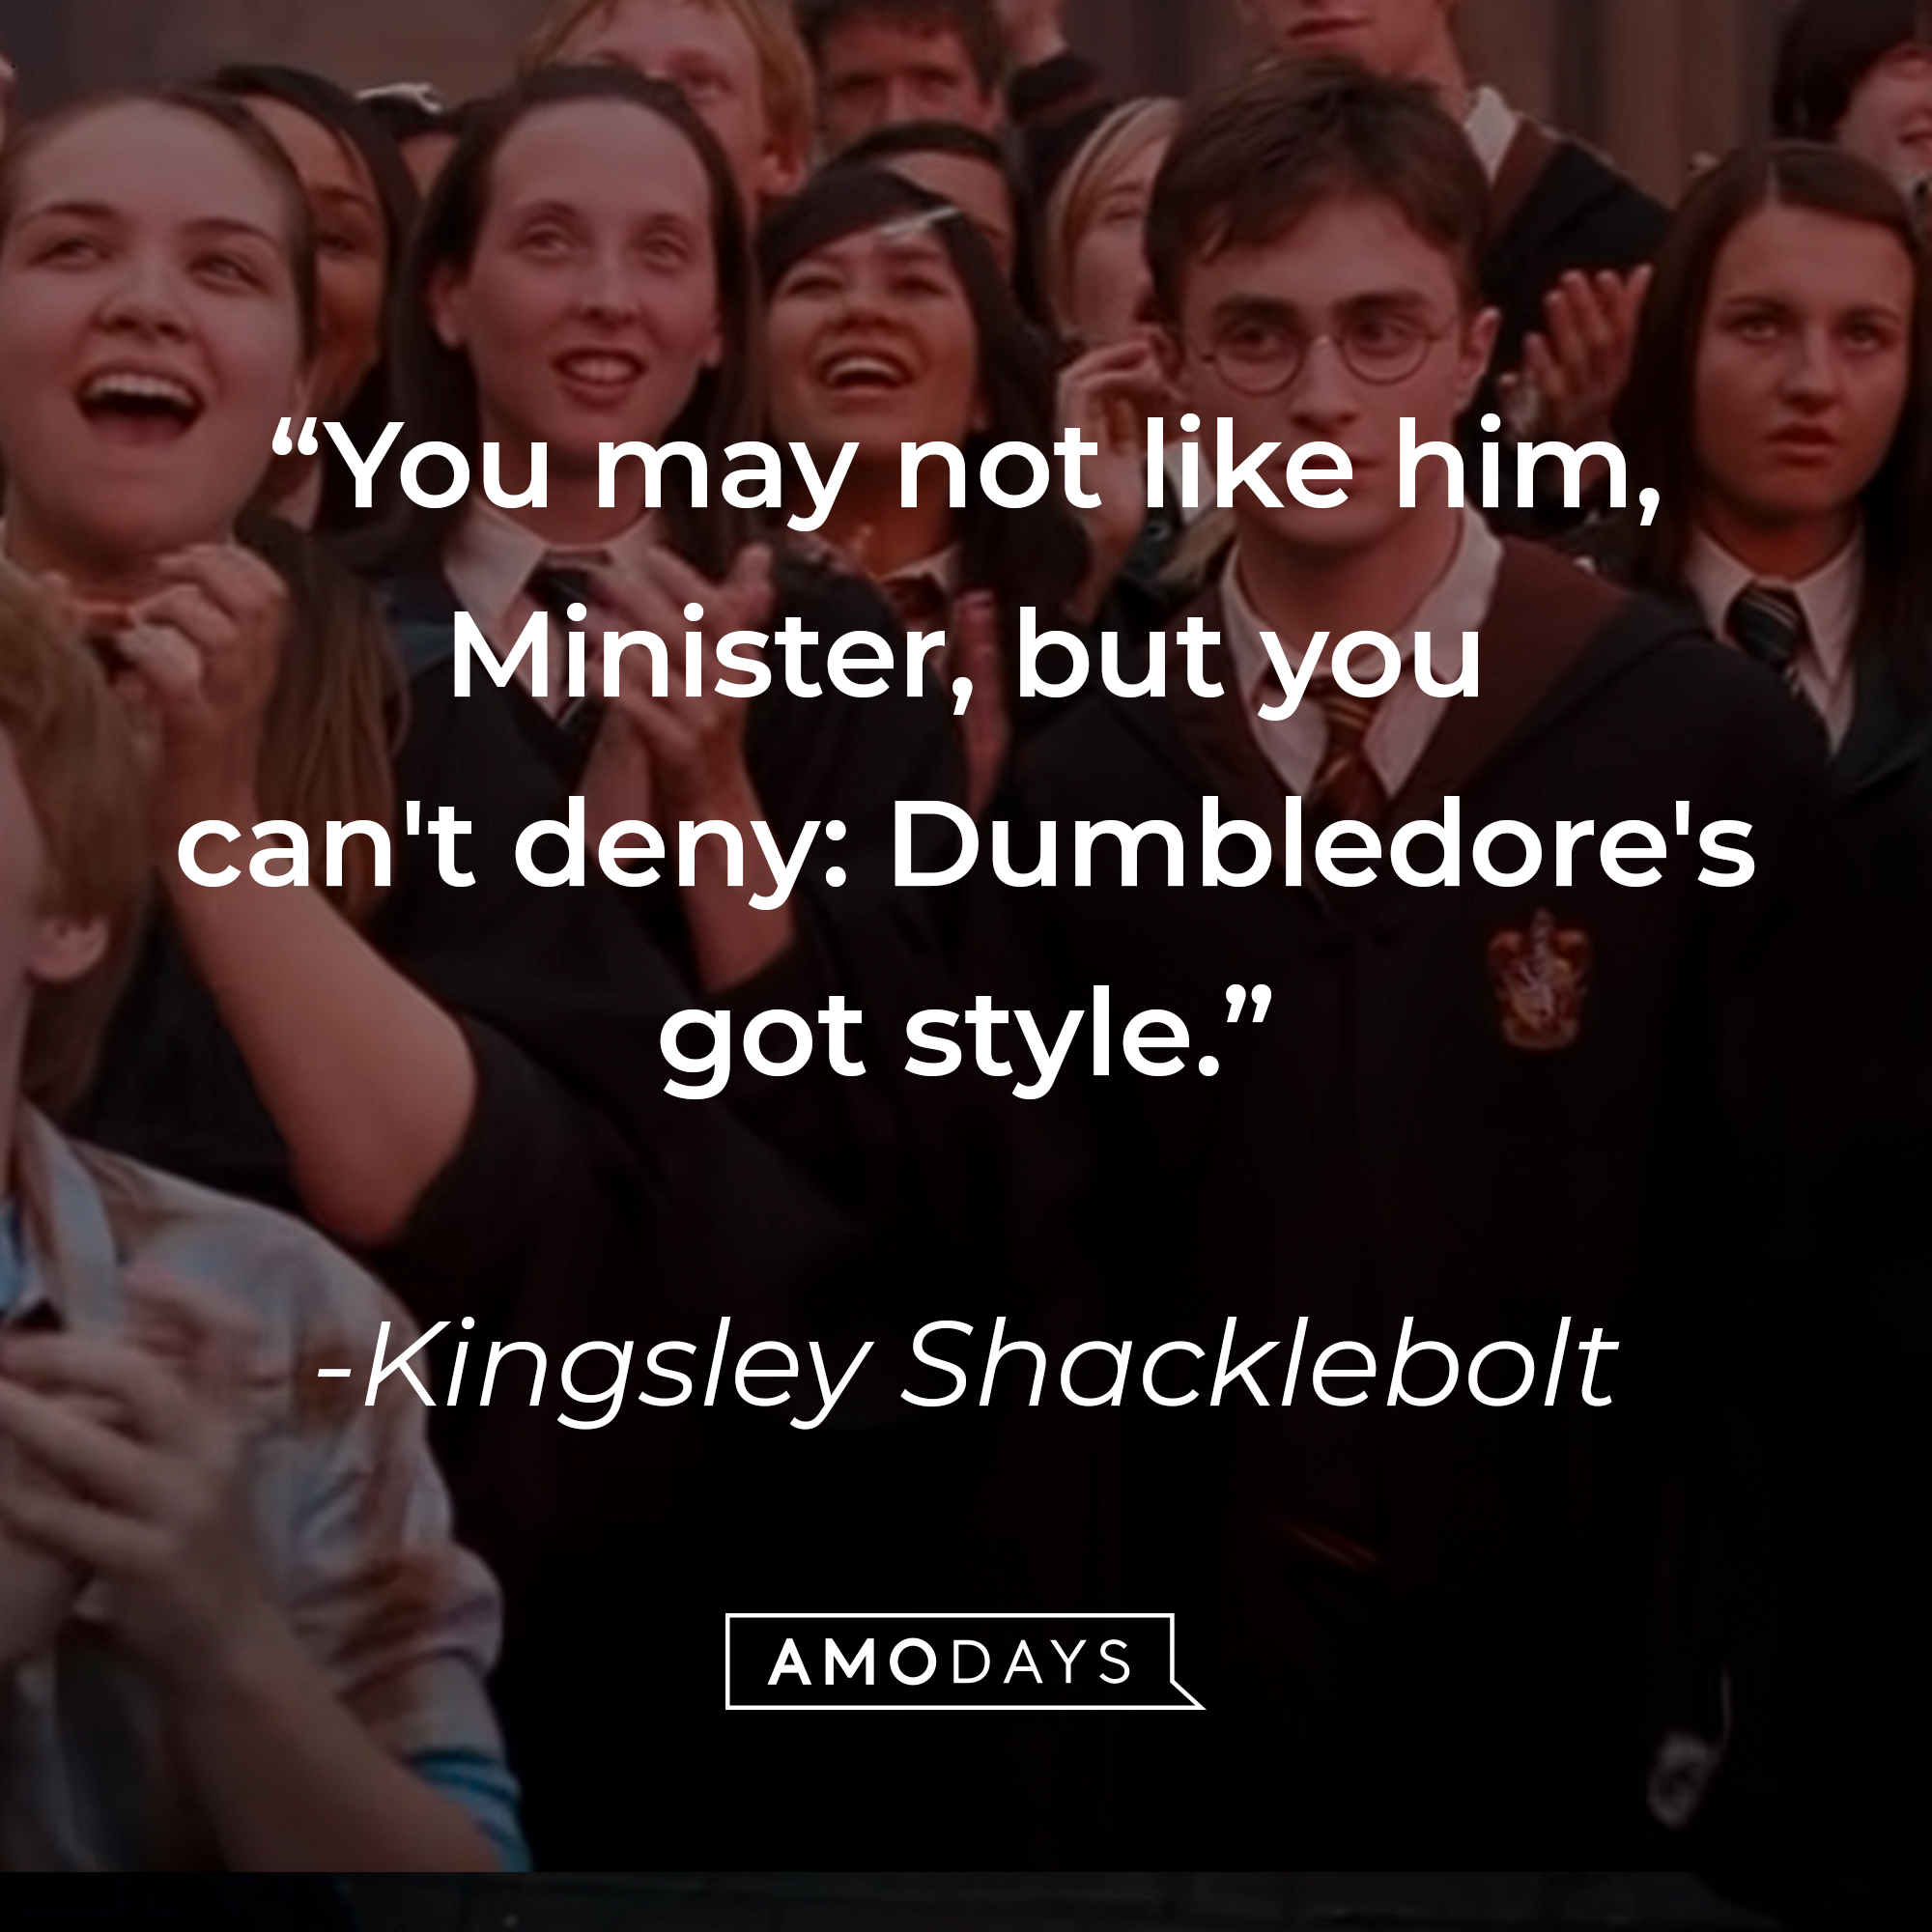 Kingsley Shacklebolt's quote: “You may not like him, Minister, but you can't deny: Dumbledore's got style.” | Source: youtube.com/harrypotter